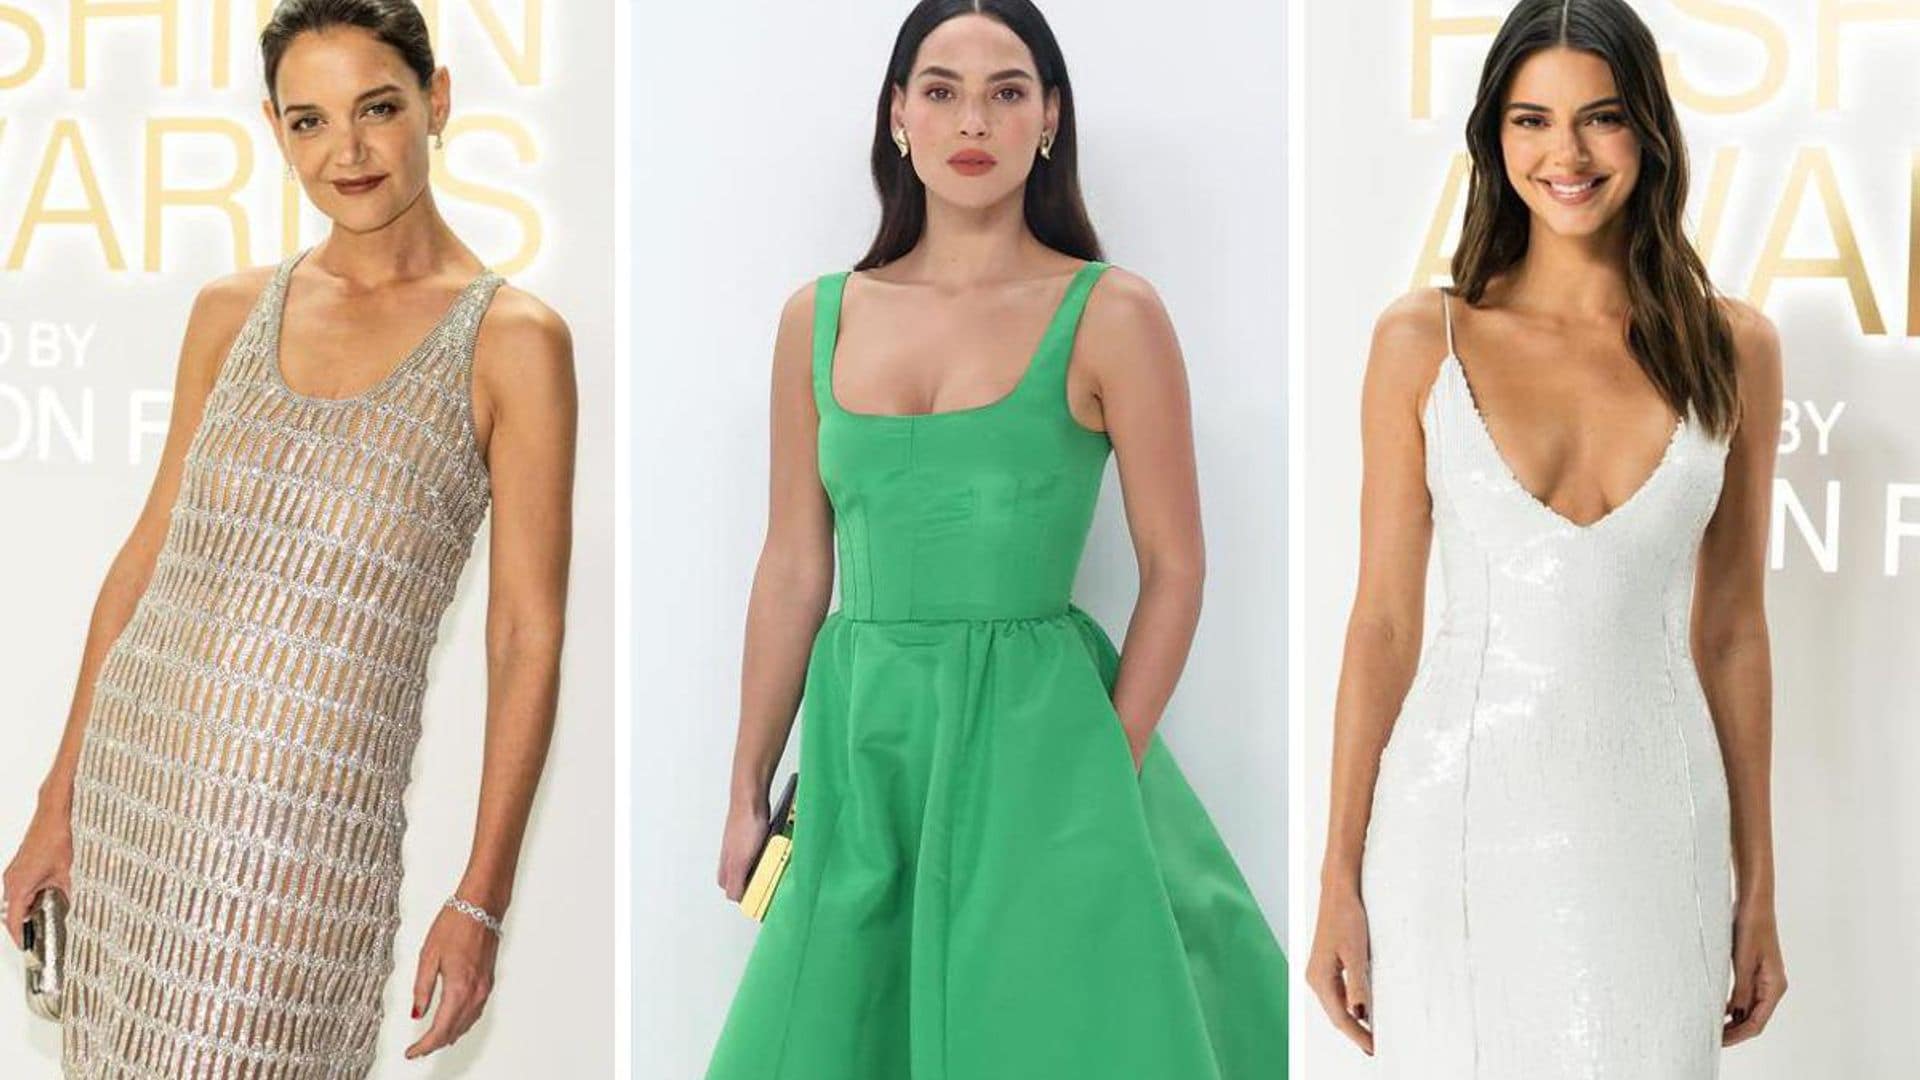 Best looks at the 2022 CFDA Awards: From the Kardashians to Katie Holmes, Cher, and more